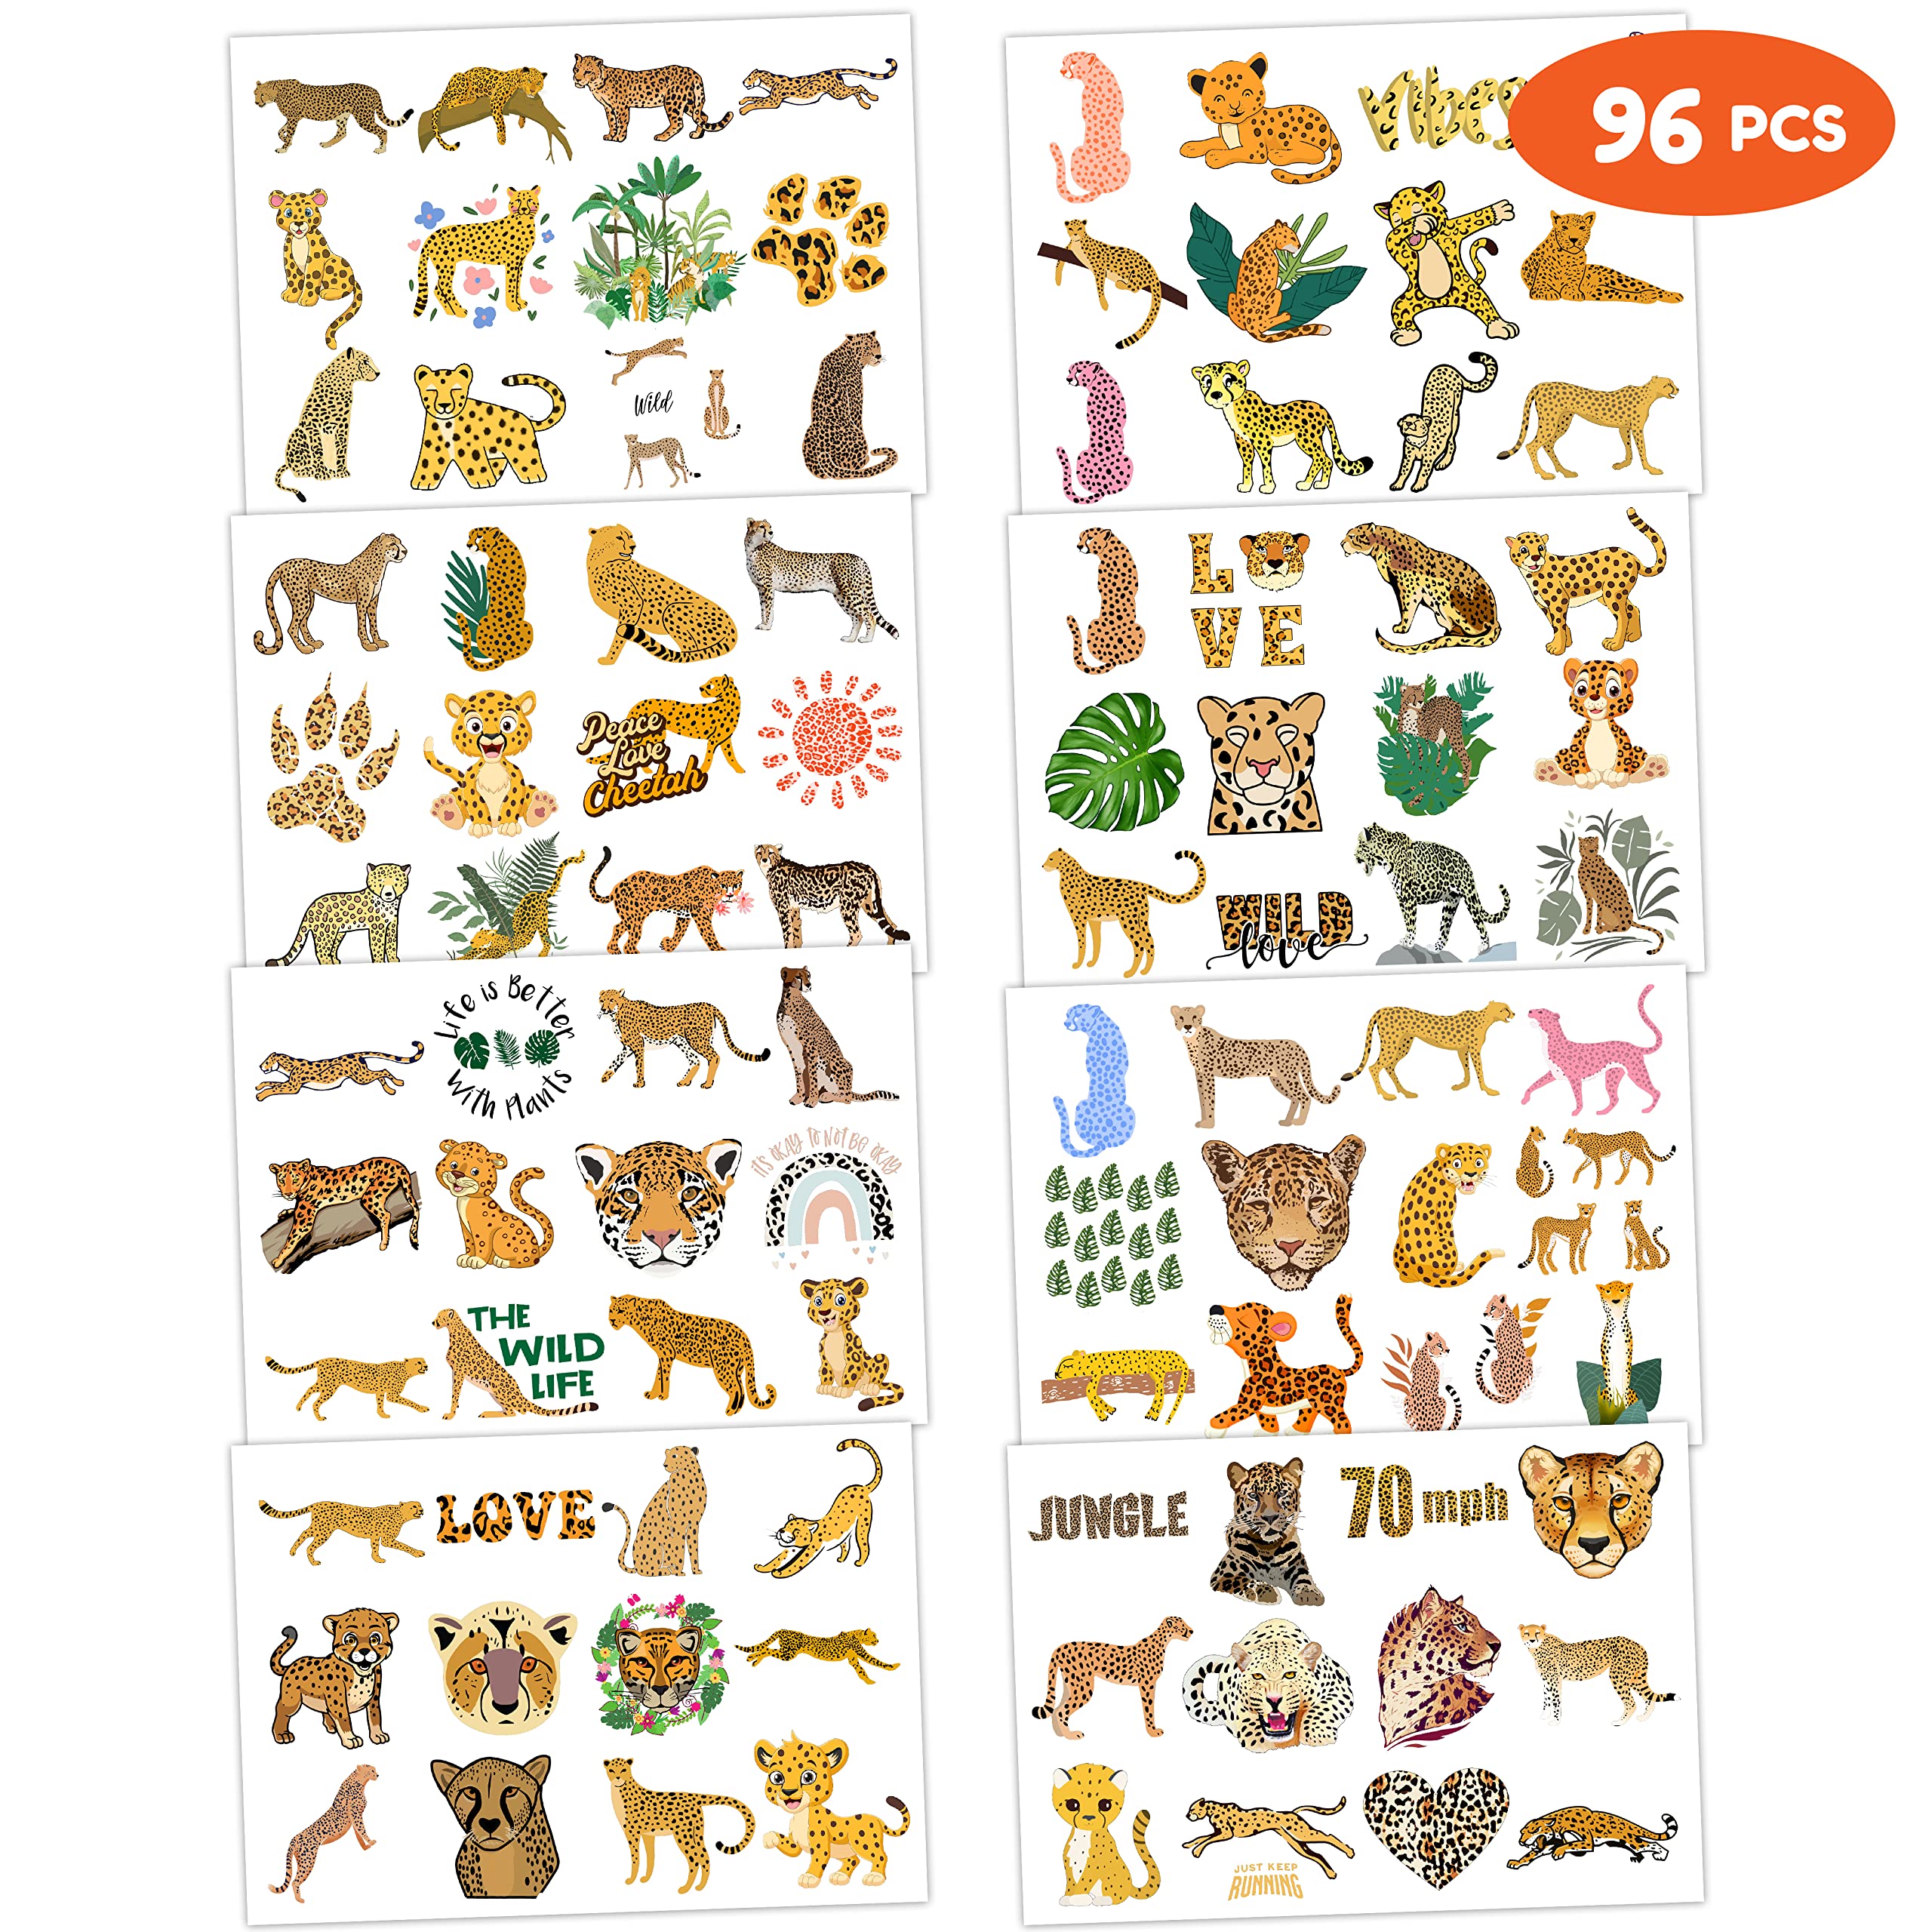 8 Sheets (96PCS) Cheetah Tattoos Temporary Jungle Theme Birthday Party Supplies Favors Decorations Tattoo Stickers For Boys Girls Gifts Classroom School Prizes Rewards